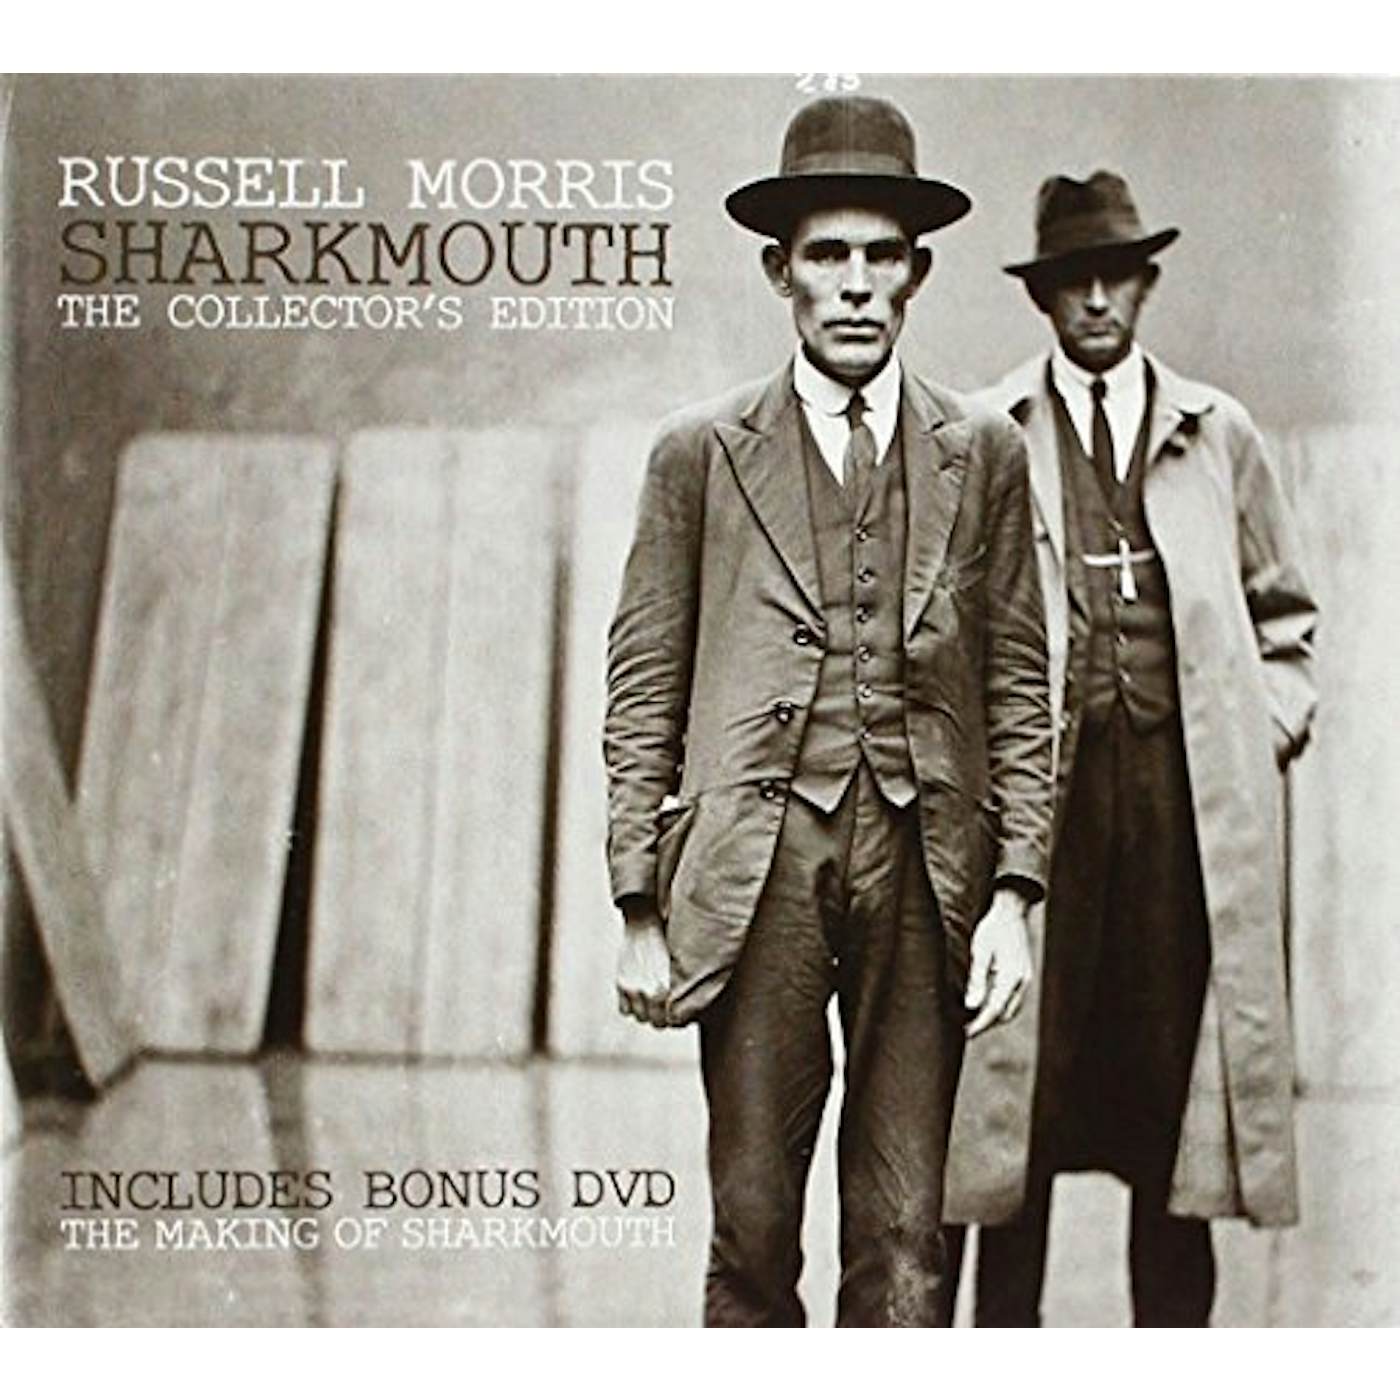 Russell Morris SHARKMOUTH-THE COLLECTOR'S EDITION CD